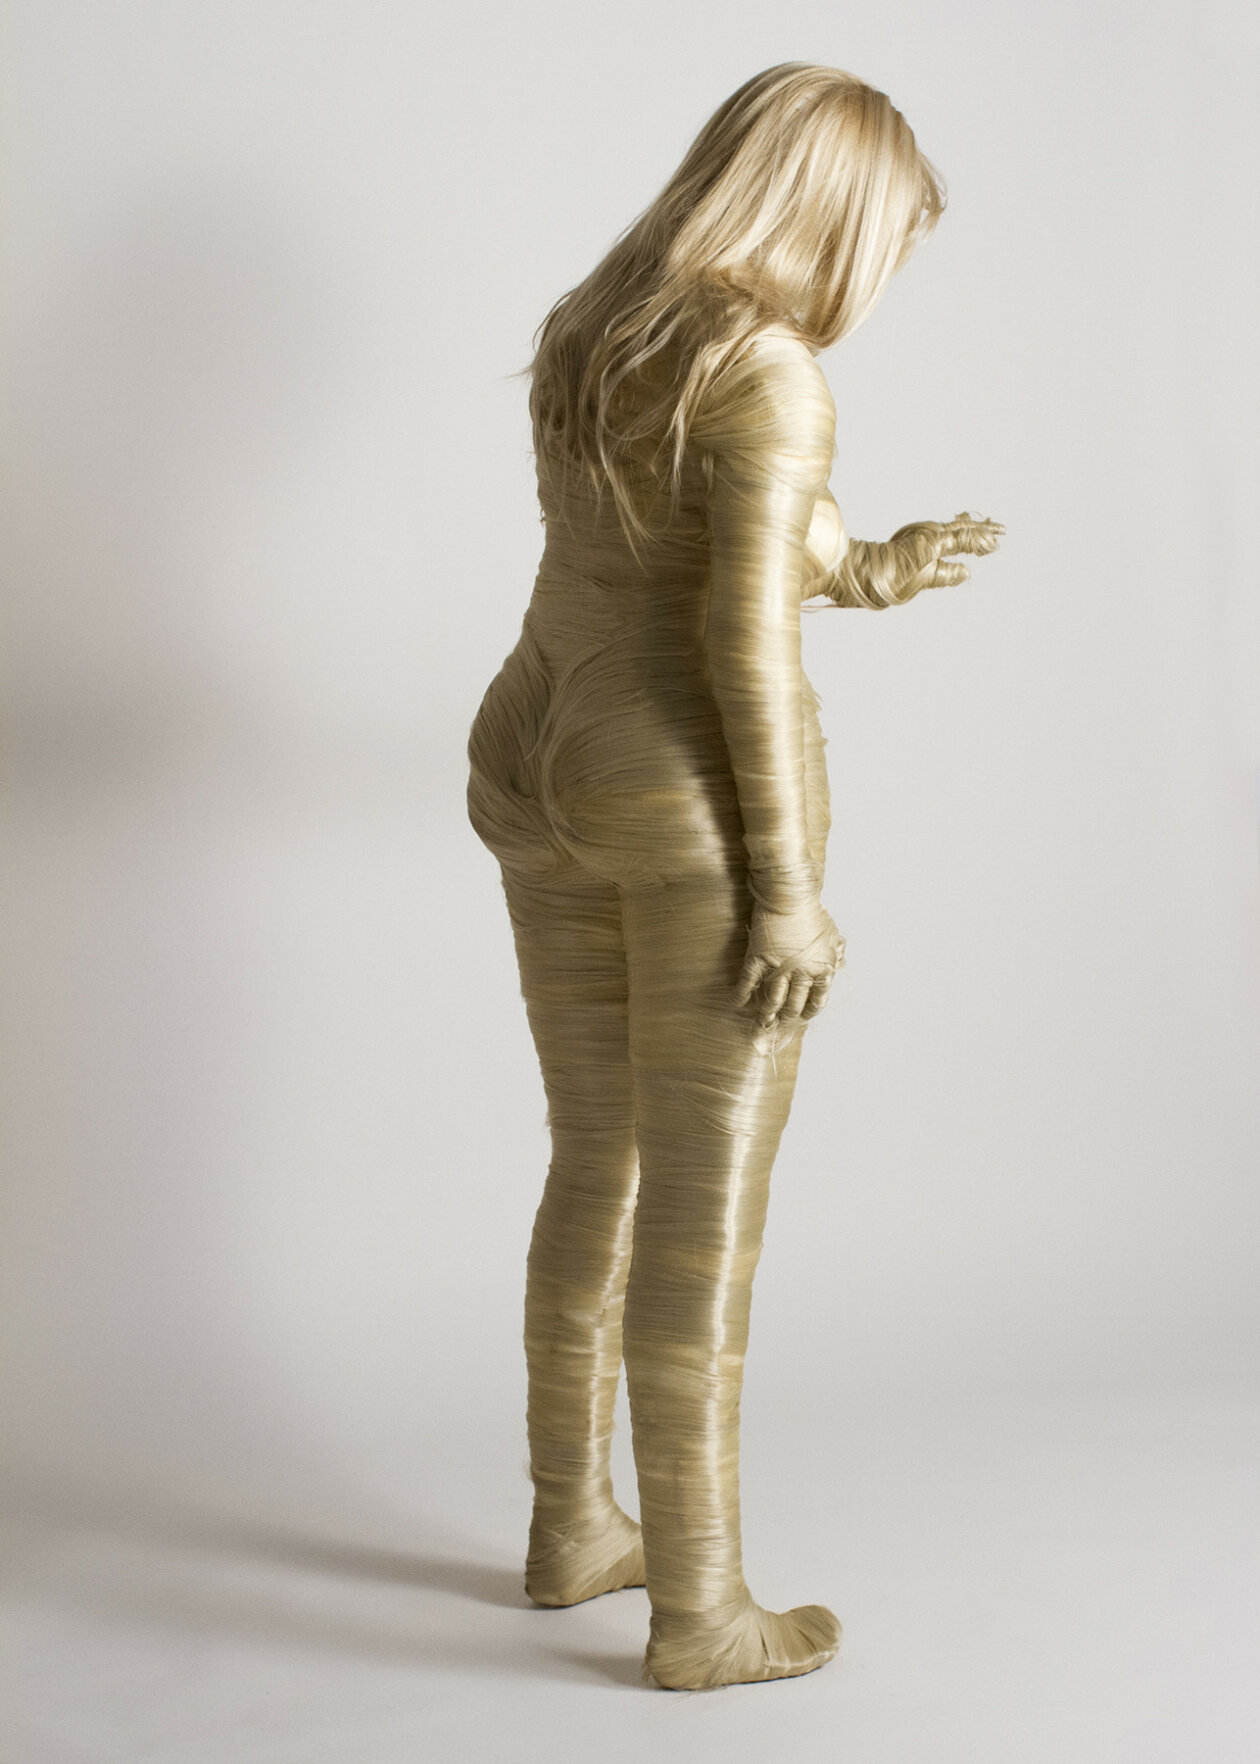 Hair People, Surreal And Poetic Figurative Sculptures By Lauren Carly Shaw (1)